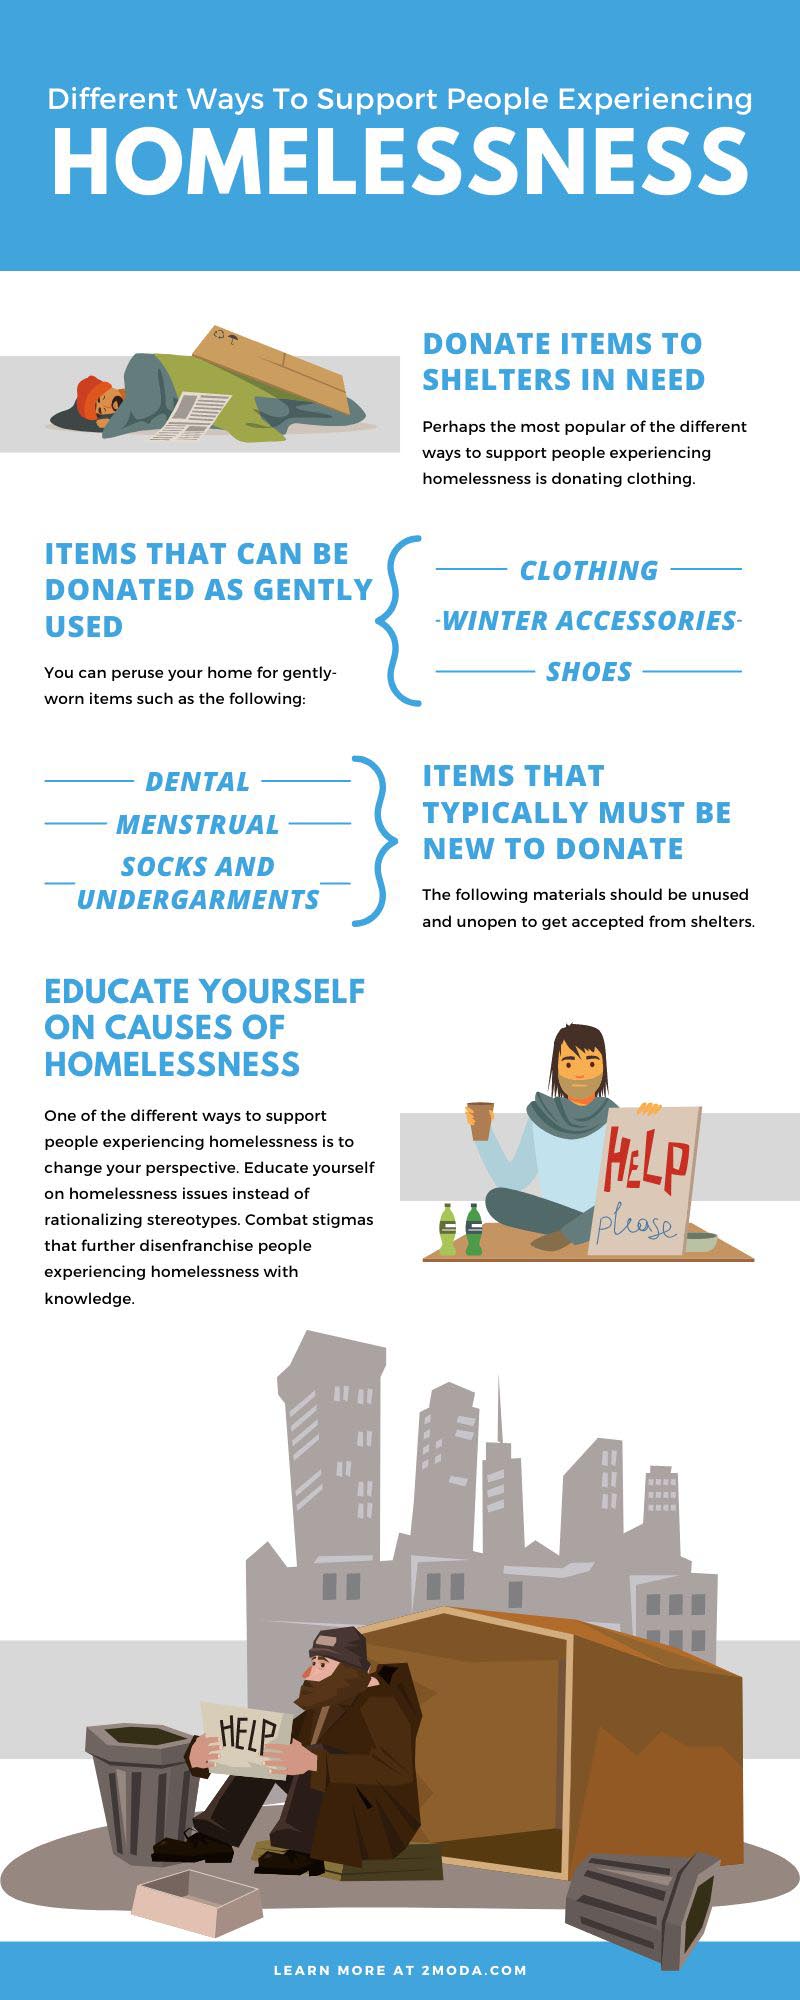 Different Ways To Support People Experiencing Homelessness